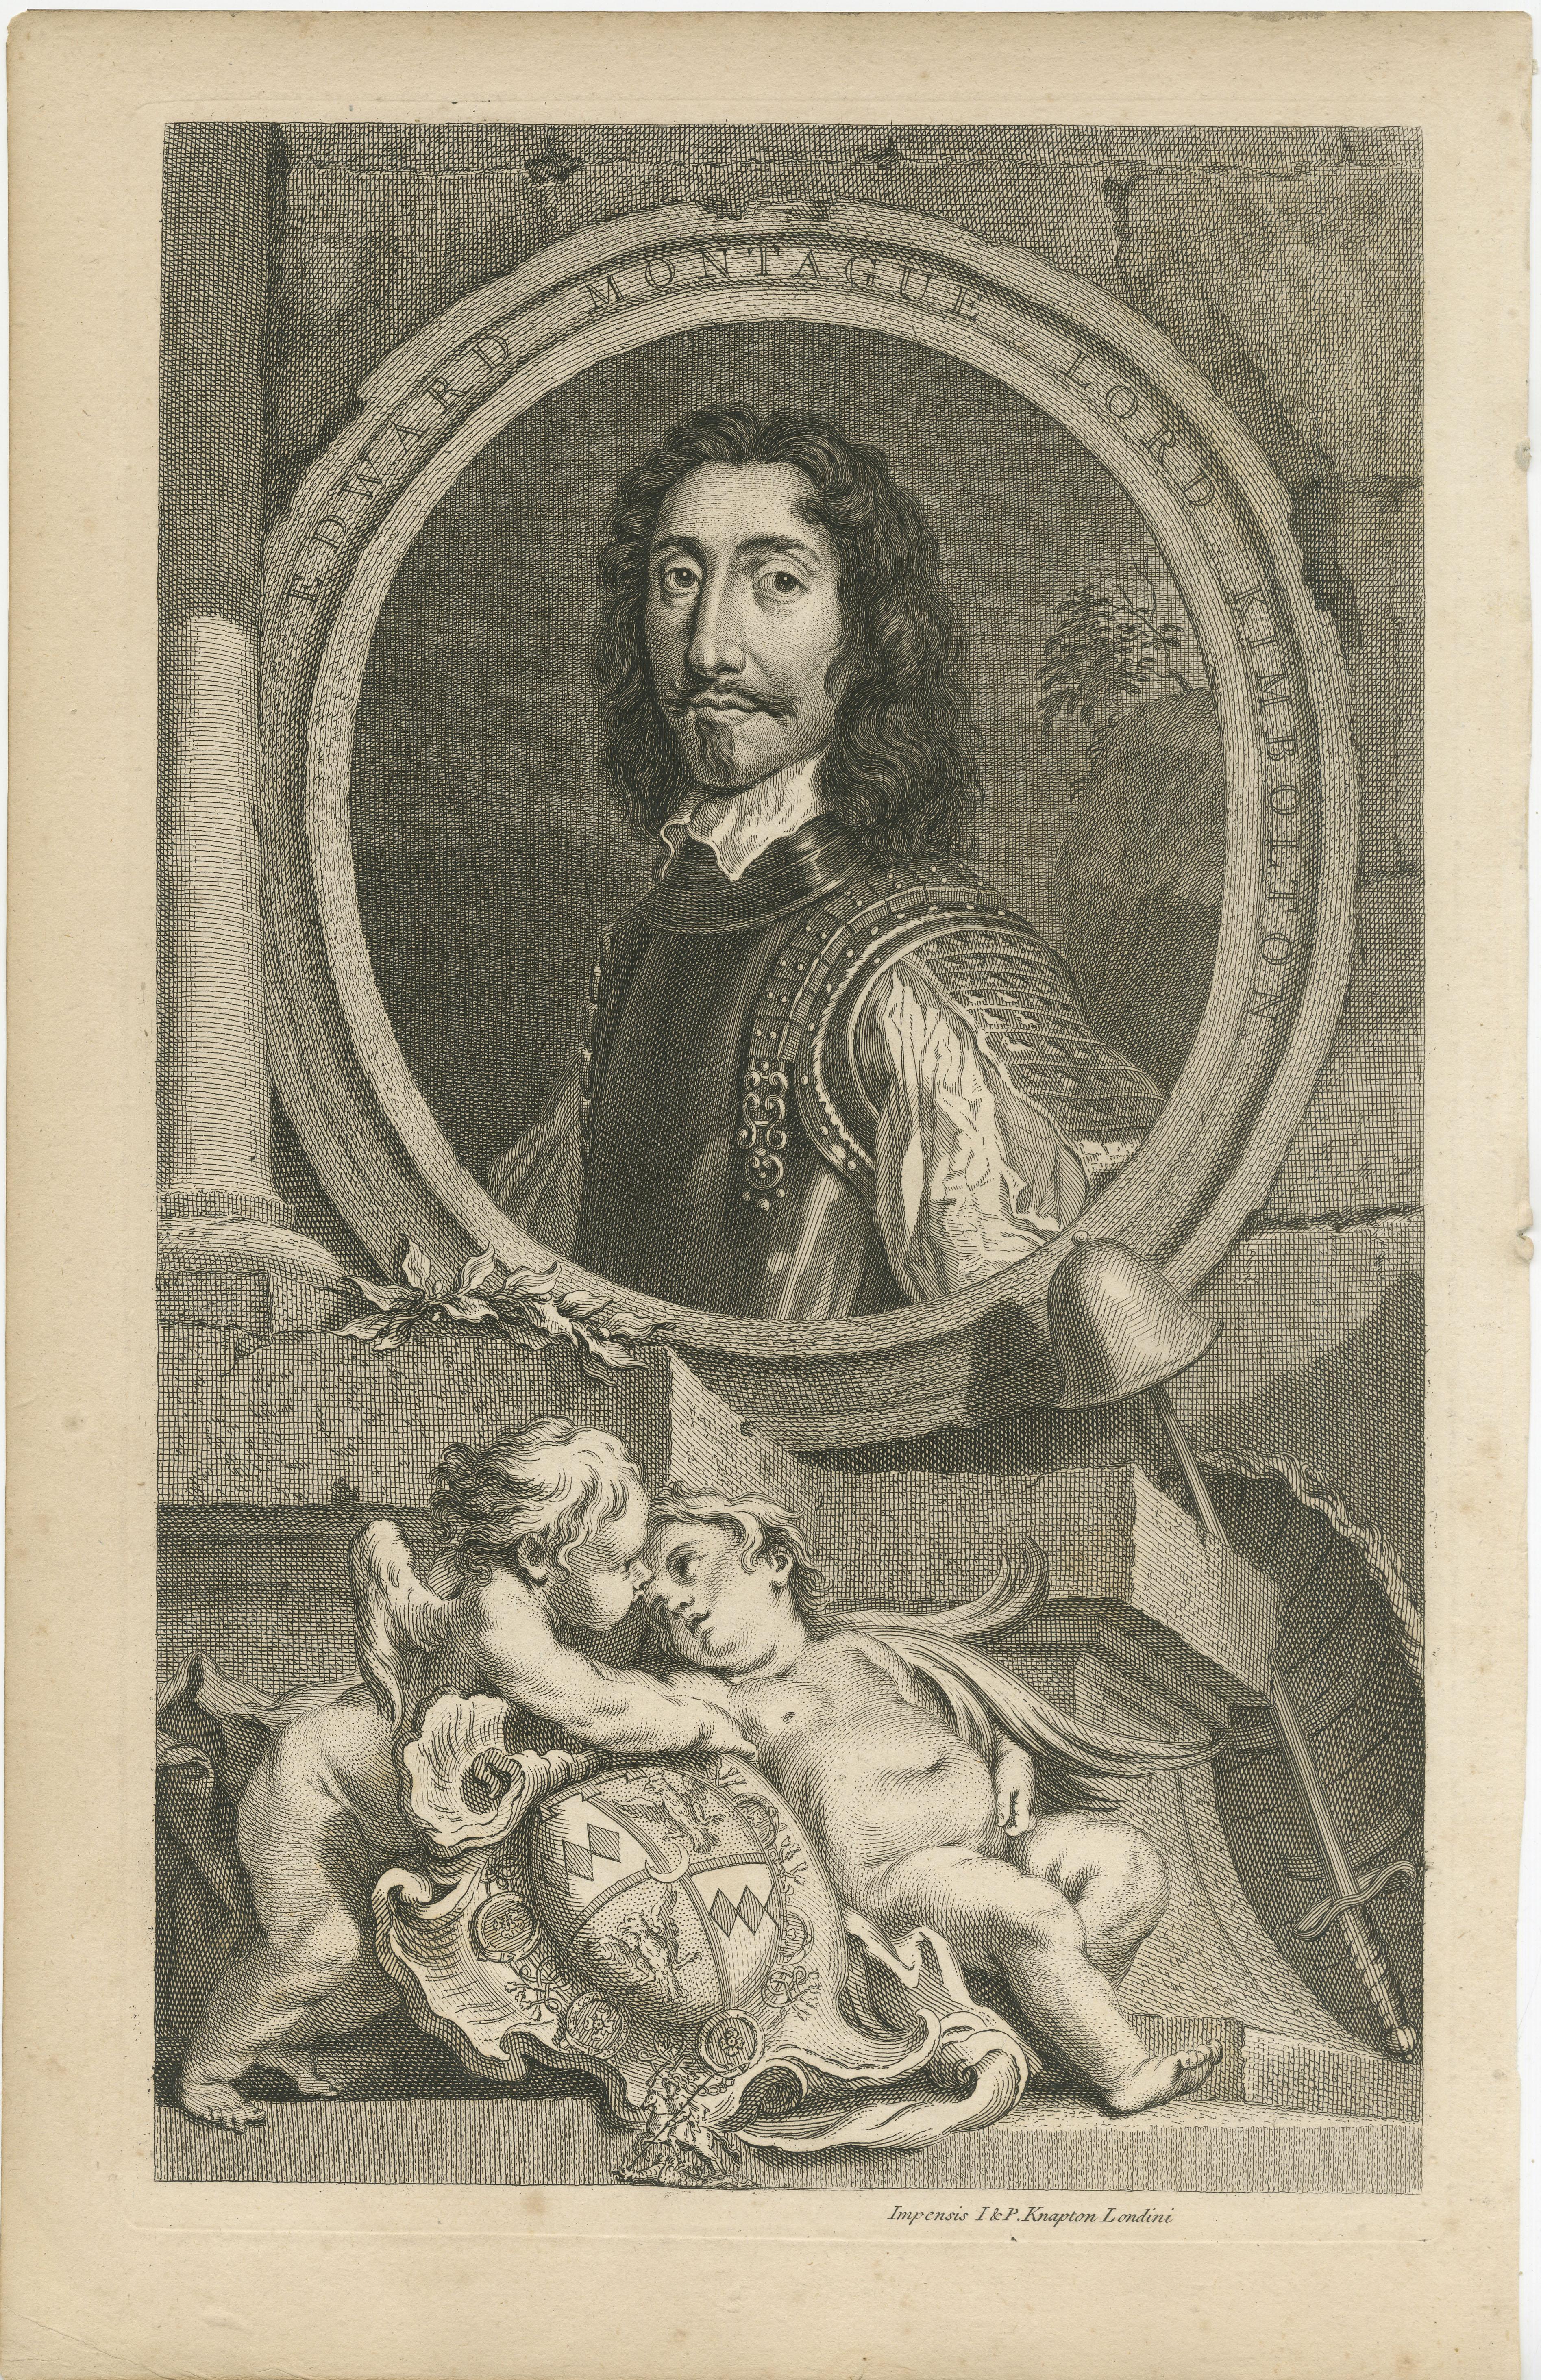 Antique portrait titled 'Edward Montague Lord Kimbolton'. Edward Montagu, 2nd Earl of Manchester, KG, KB, FRS (1602 – 5 May 1671) was an important commander of Parliamentary forces in the First English Civil War, and for a time Oliver Cromwell's